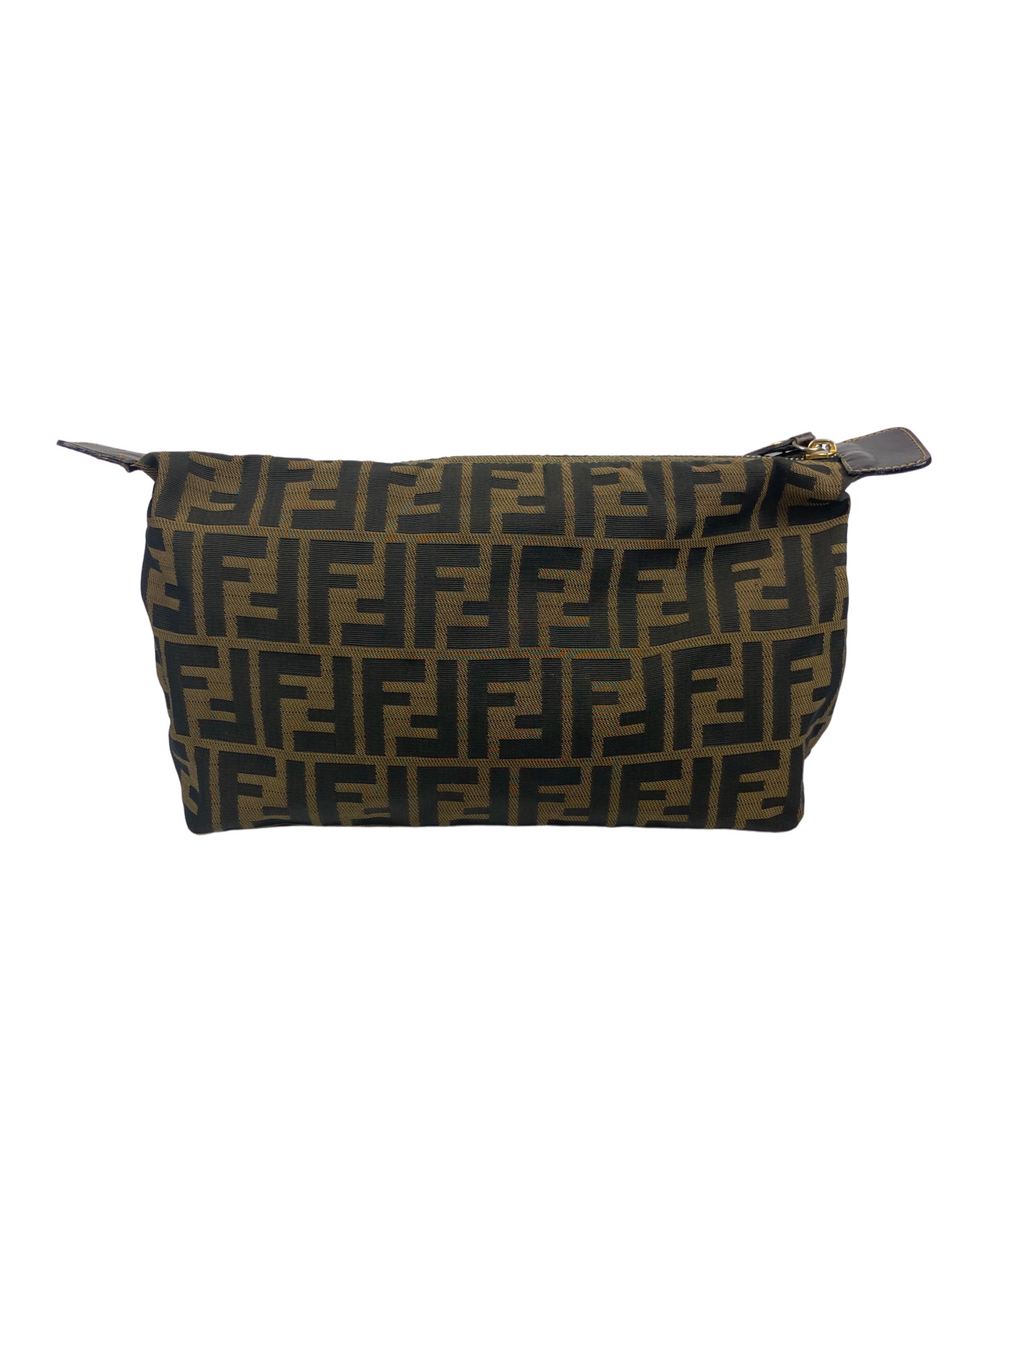 FENDI - ZUCCA MONOGRAM COSMETIC MAKE UP POUCH - VINTAGE